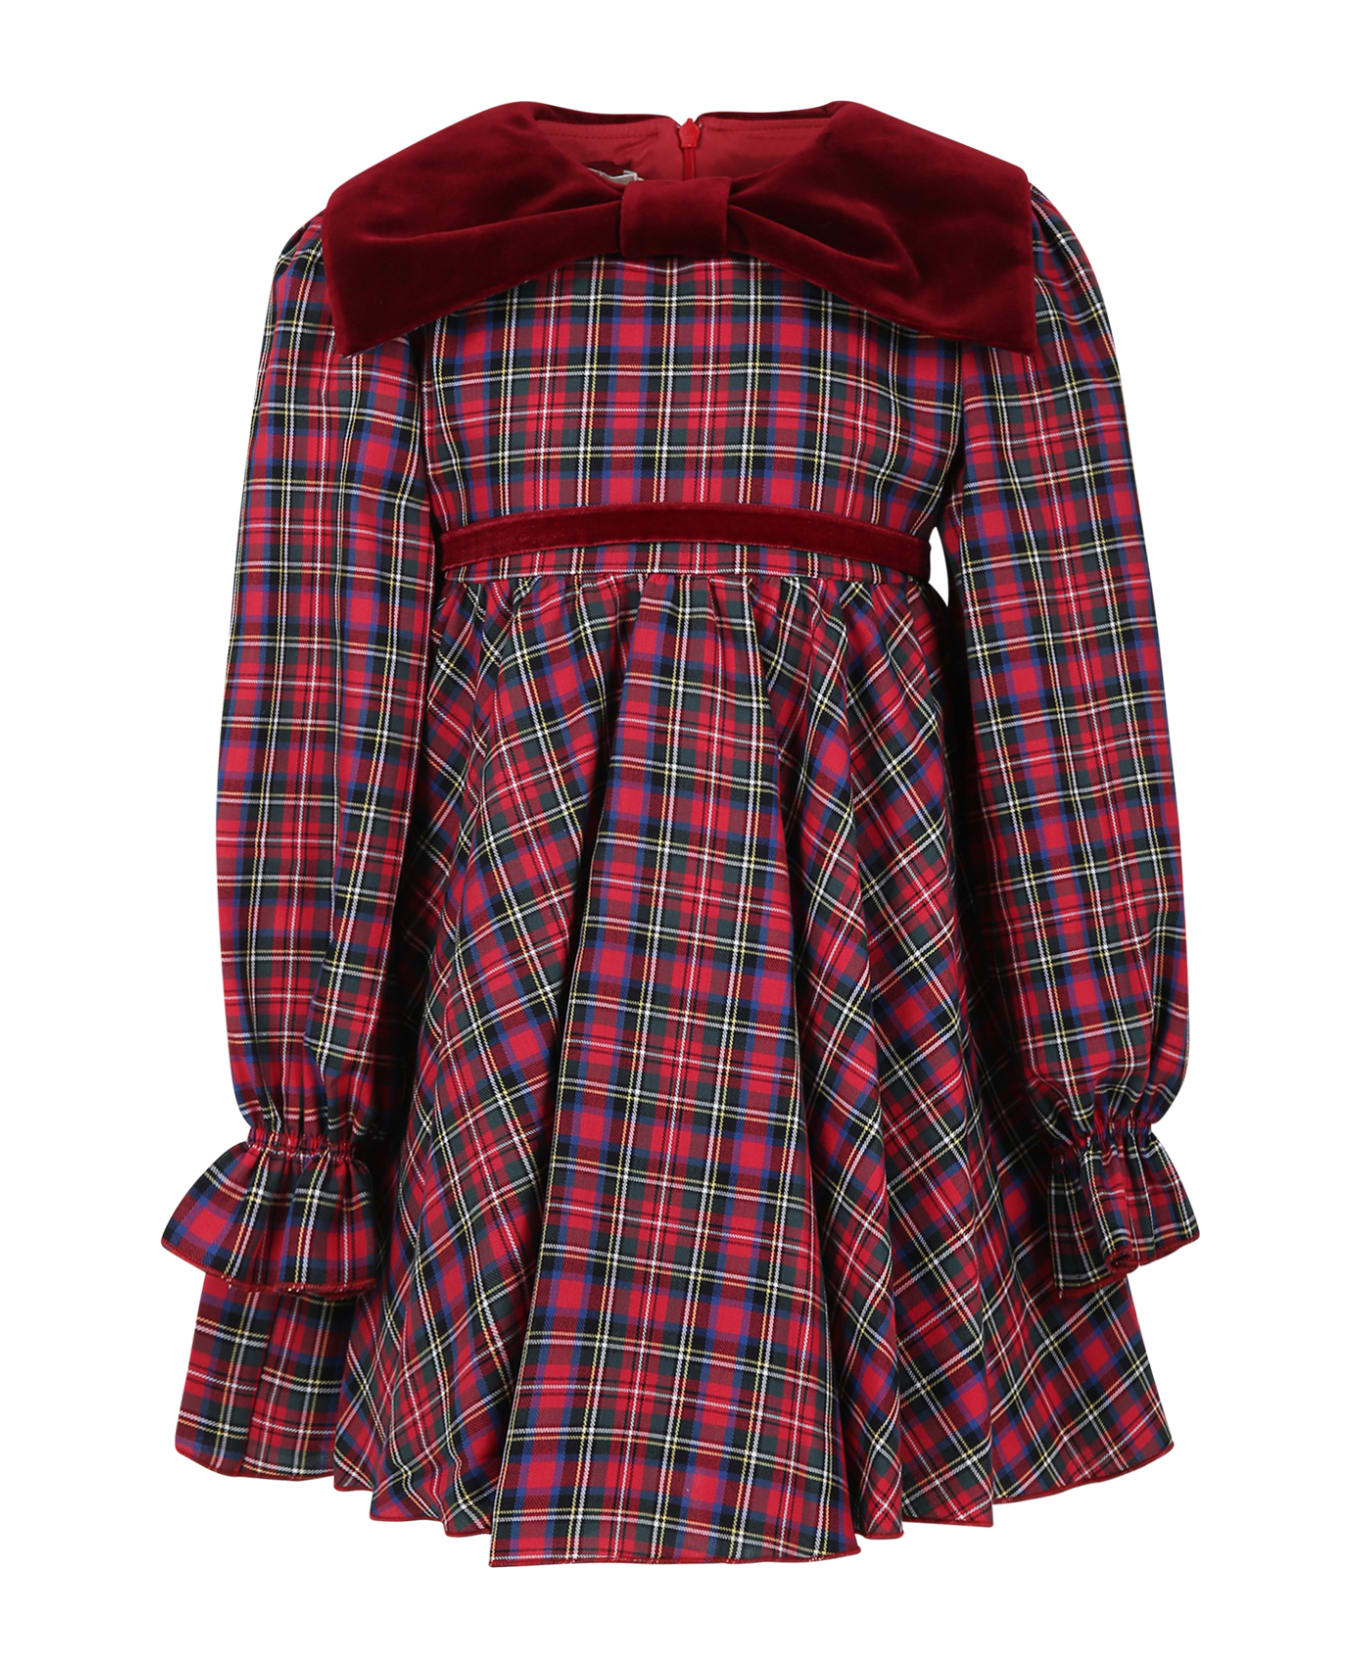 La stupenderia Elegant Red Dress For Girls With Checked Pattern - Red